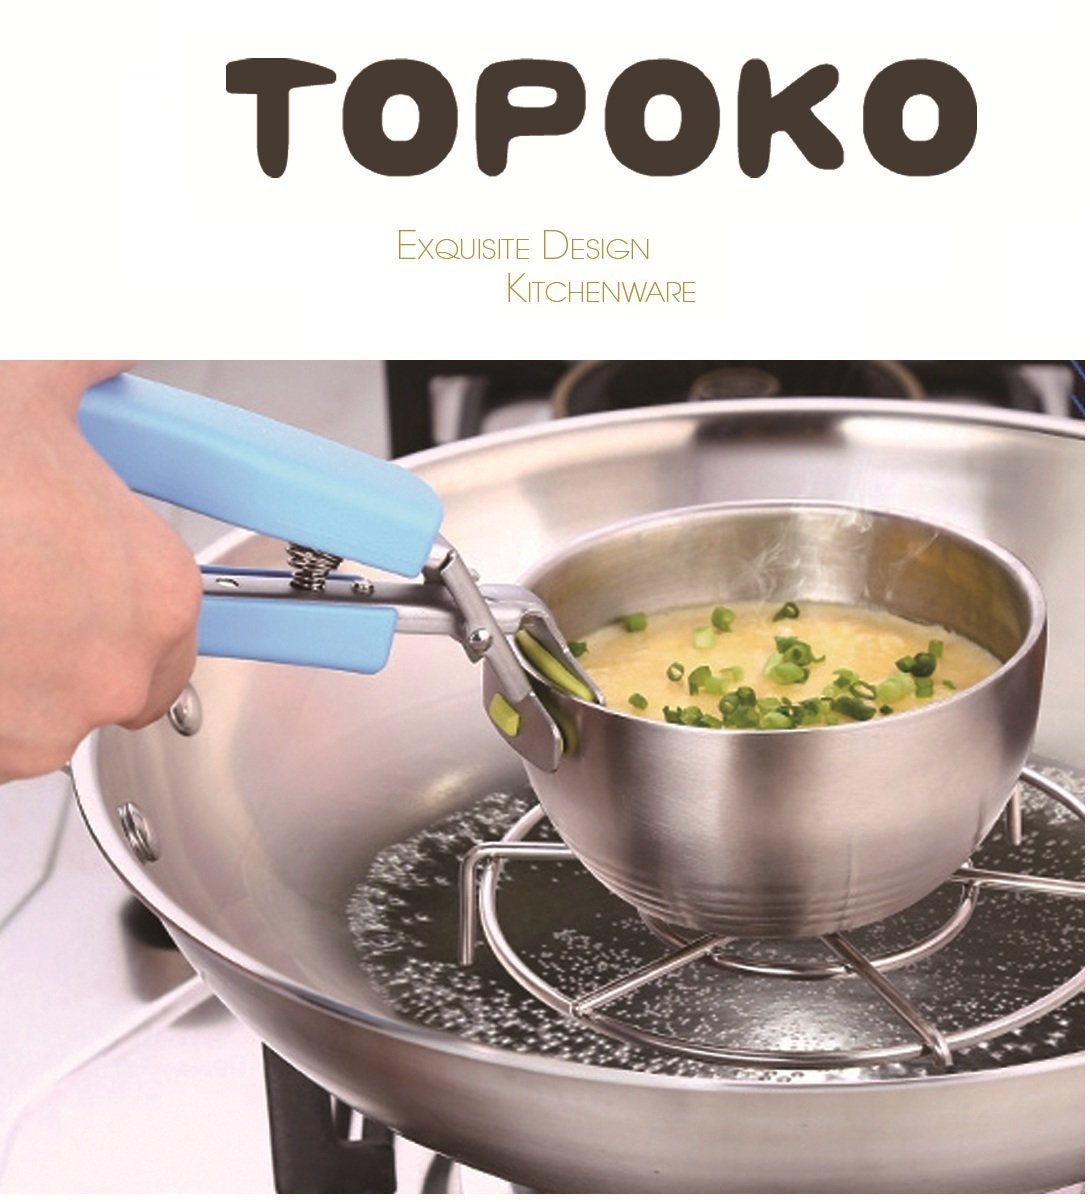 TOPOKO Stainless Steel Retriever Tong / Gripper Clip for Lift Bowl, Plate, Tray from Instant Pot, Microwave, Oven, Pot. 2 Pack.